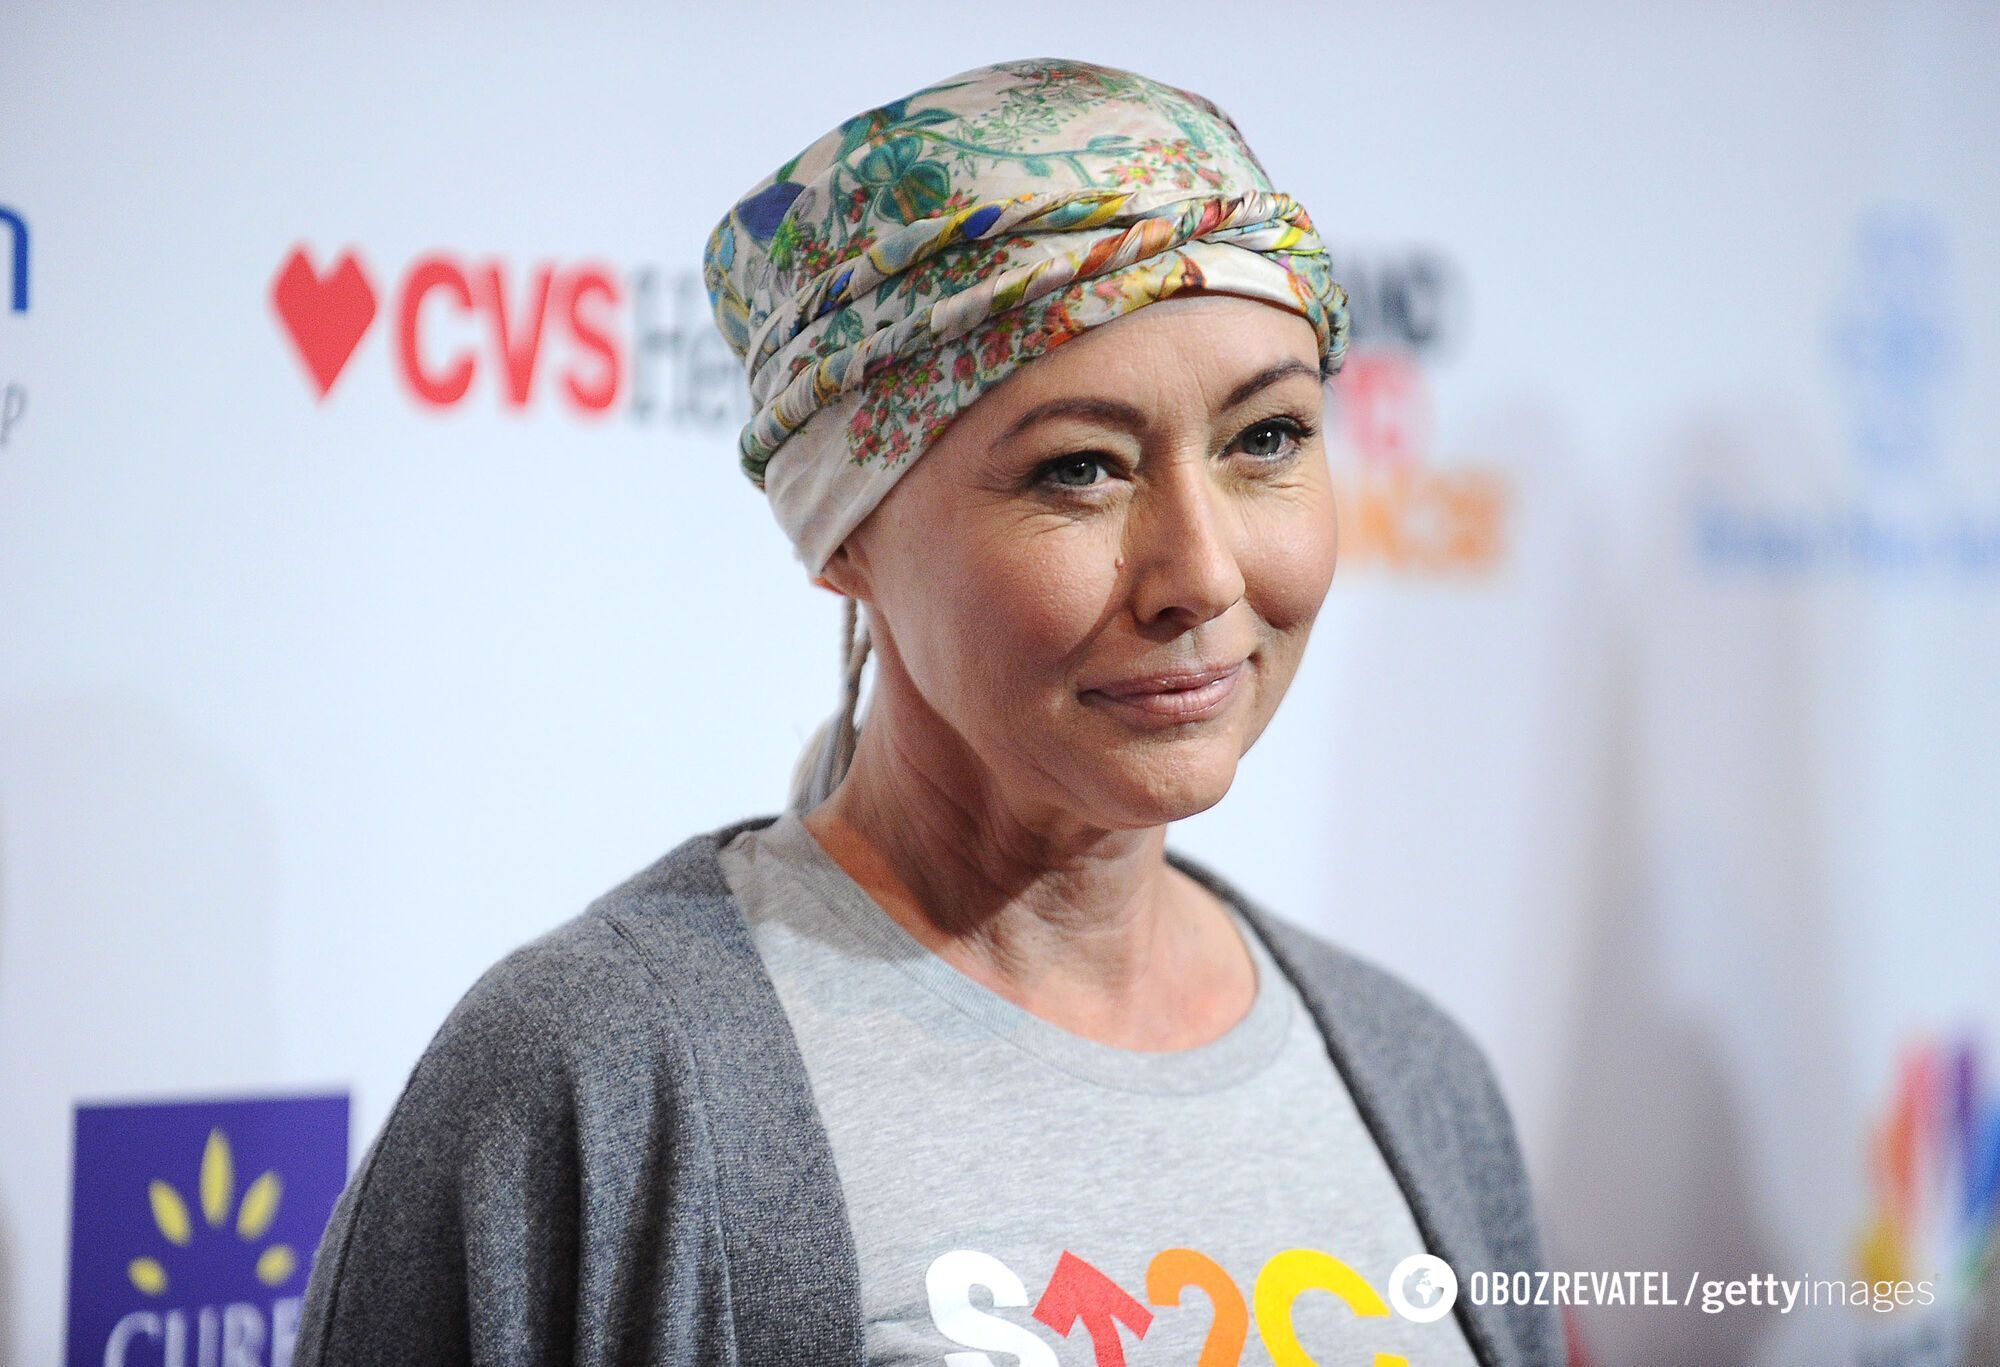 Shannen Doherty dreams of recovery